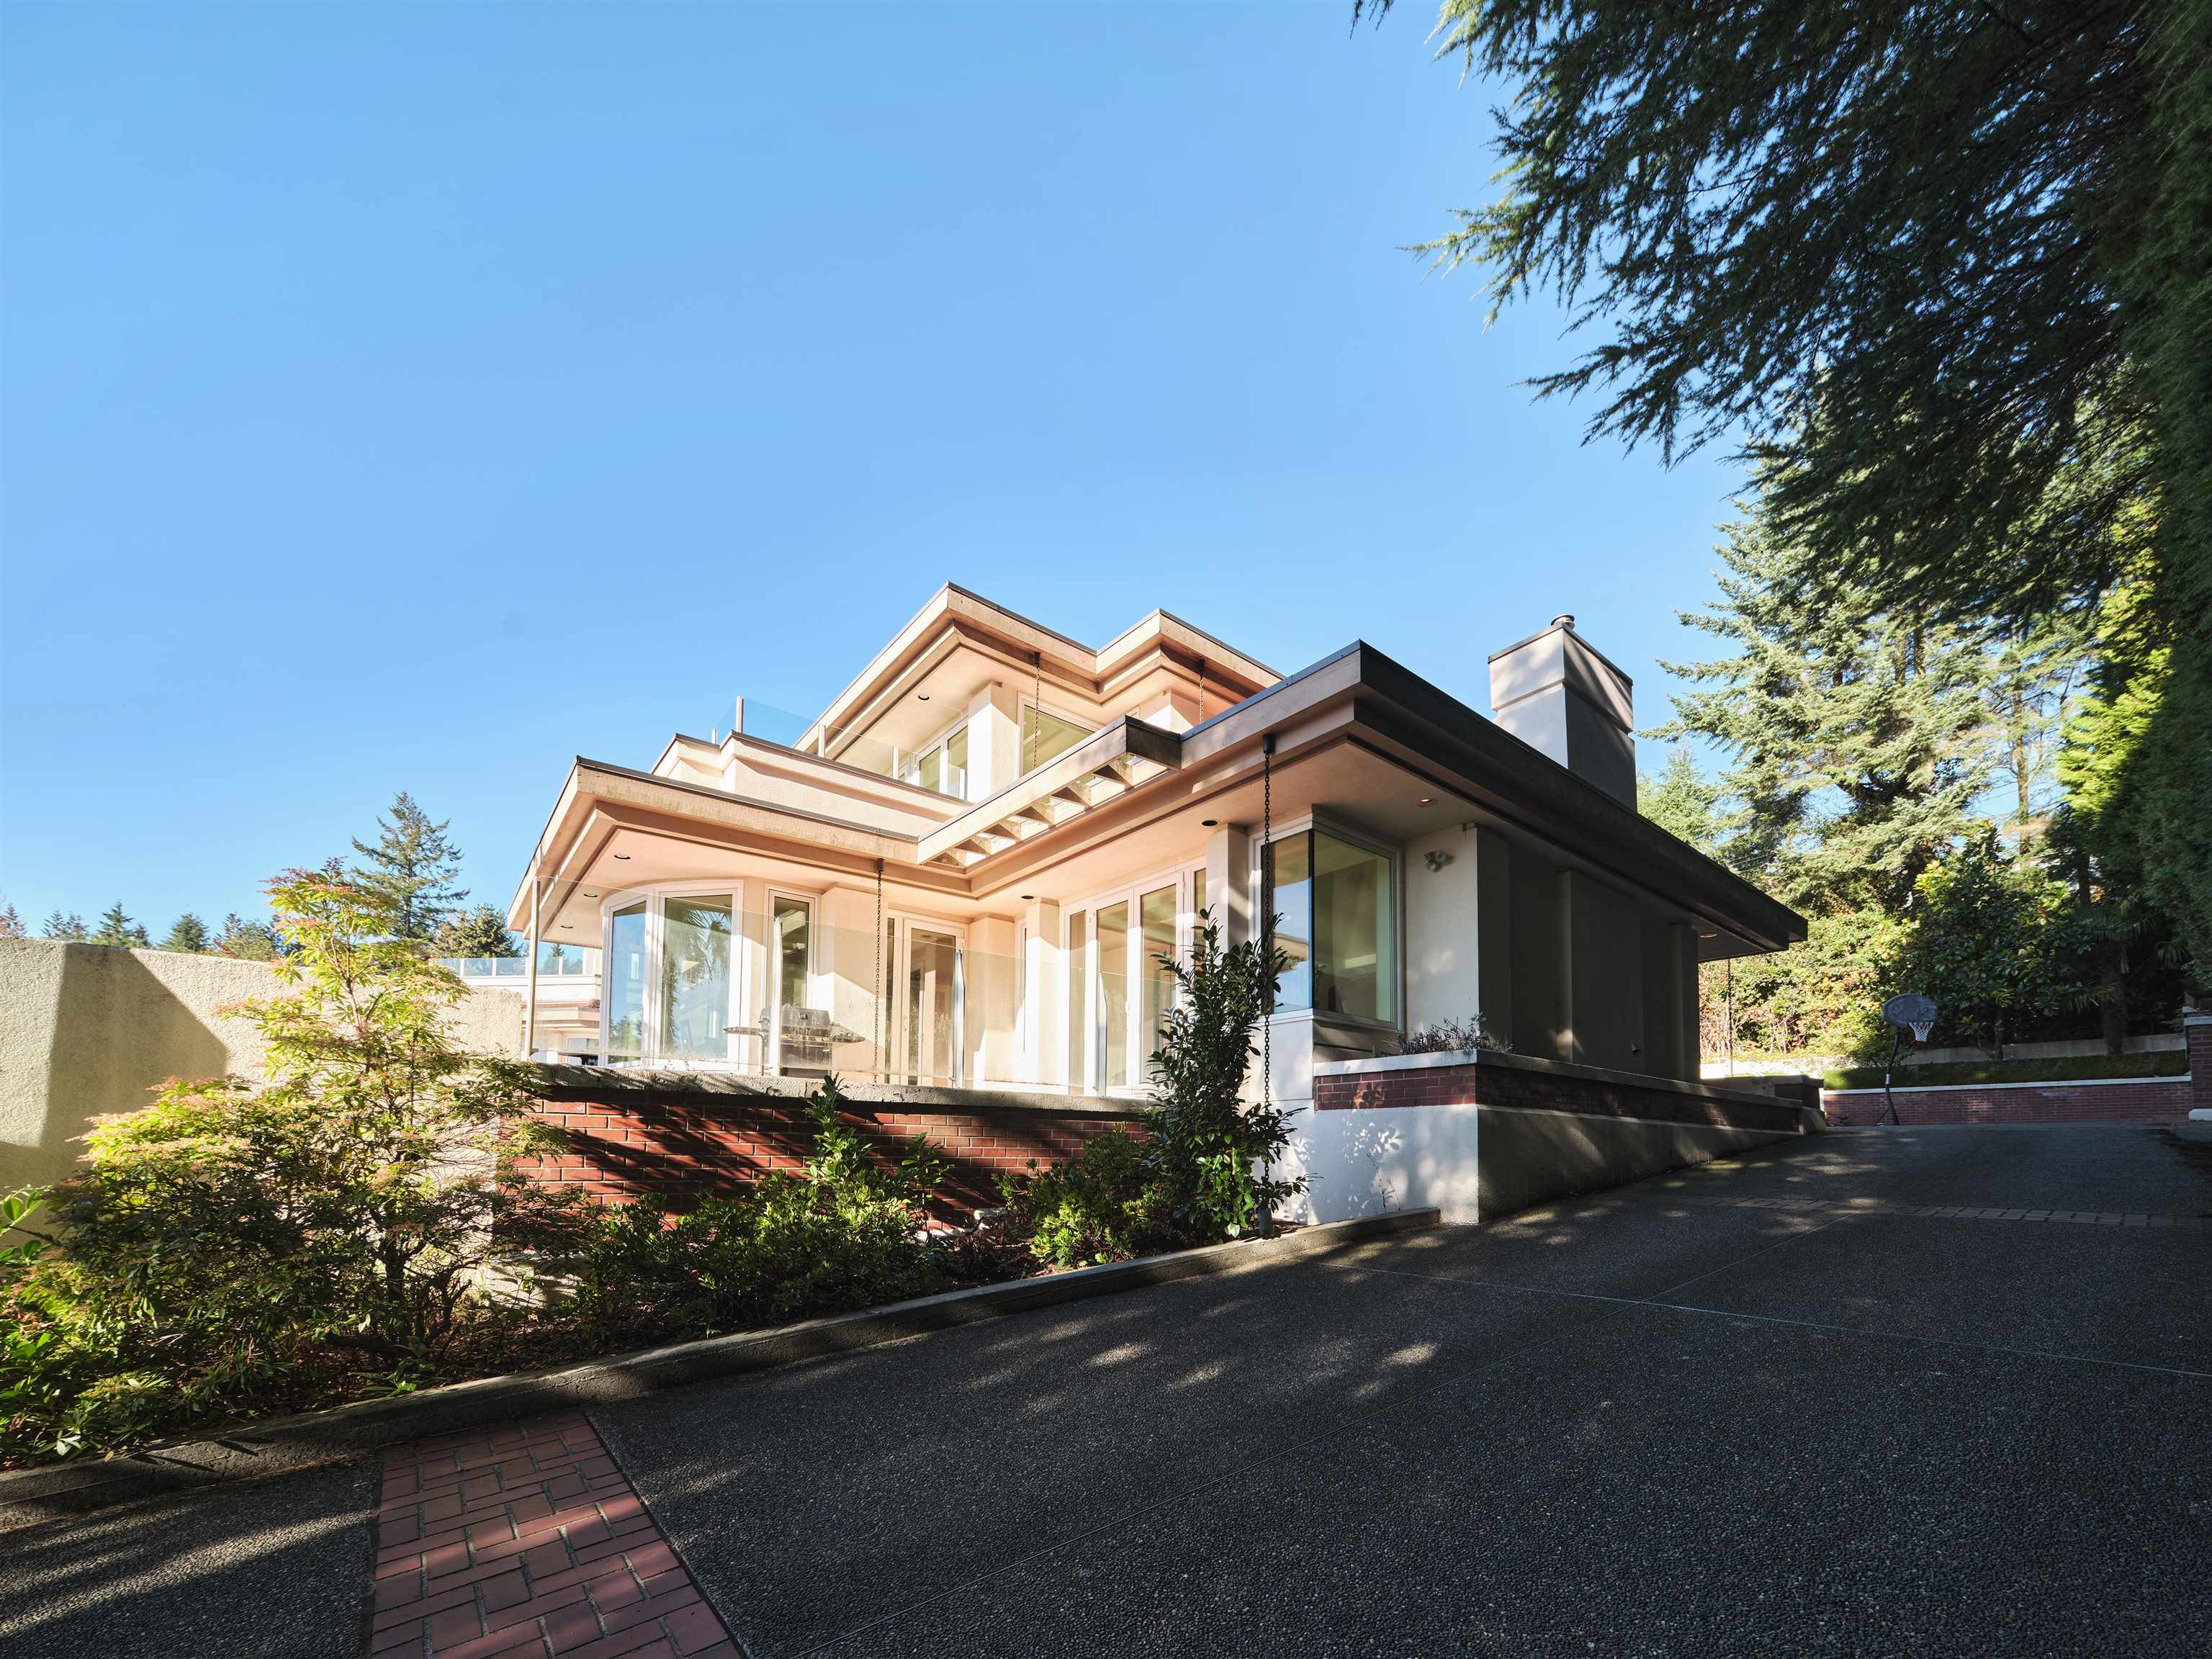 Listing image of 1025 KING GEORGES WAY